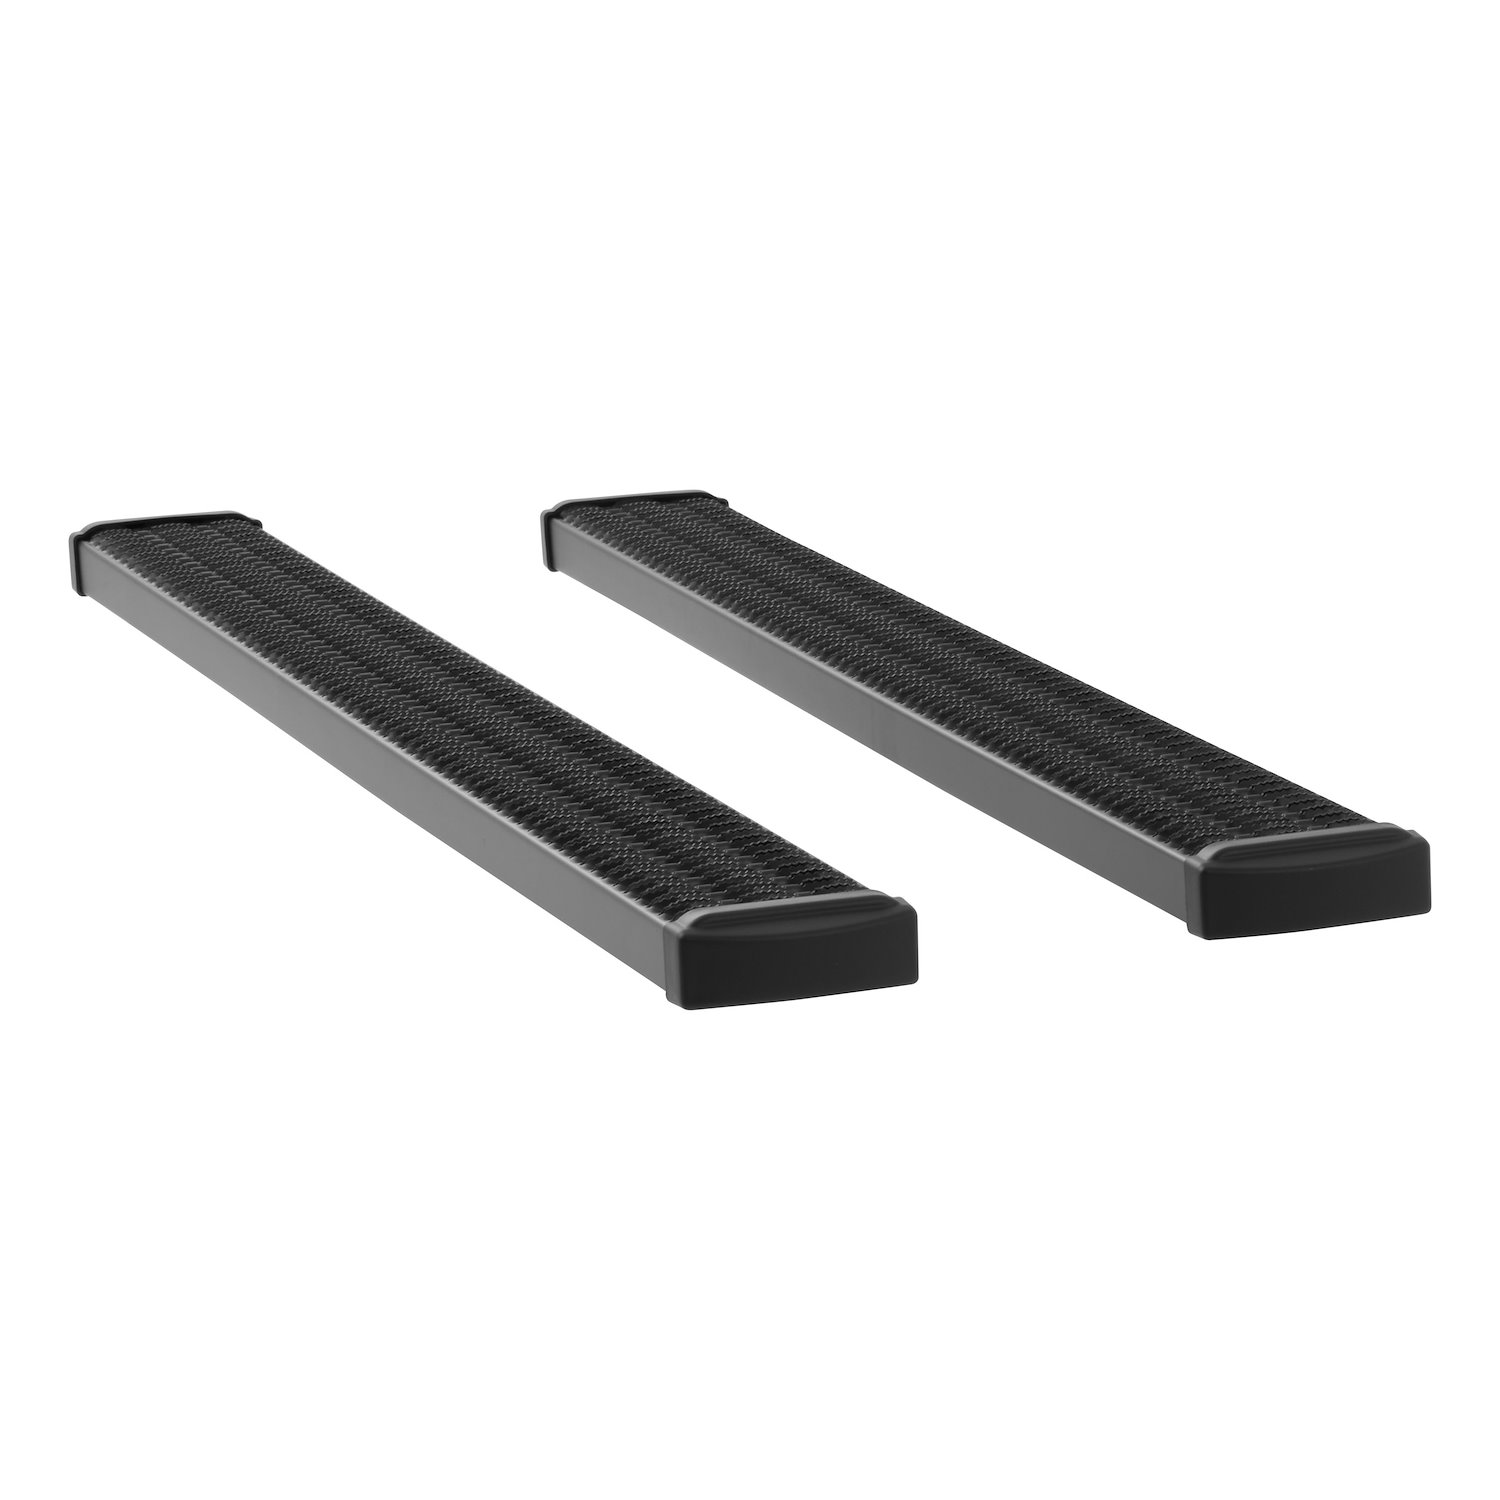 415078-401232 Grip Step 7 in. x 78 in. Black Aluminum Running Boards Fits Select Dodge, Ram 1500 Quad